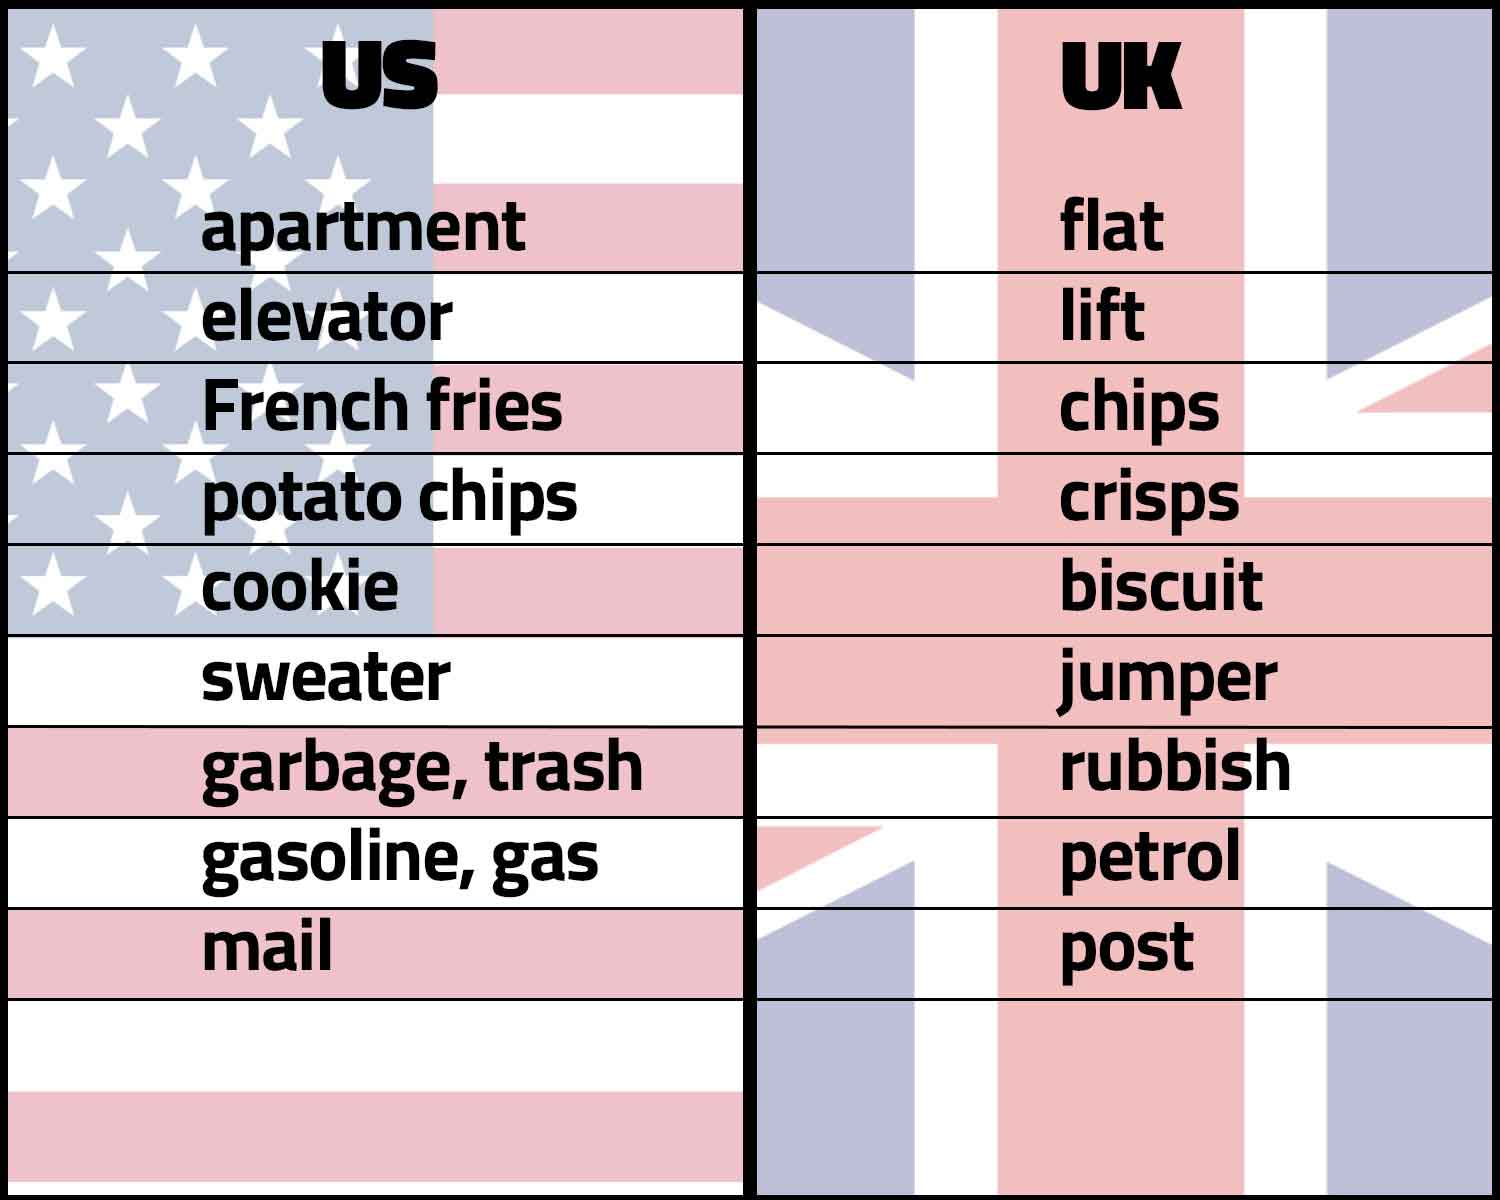 A table shows American English words side by side with the equivalent British English words.